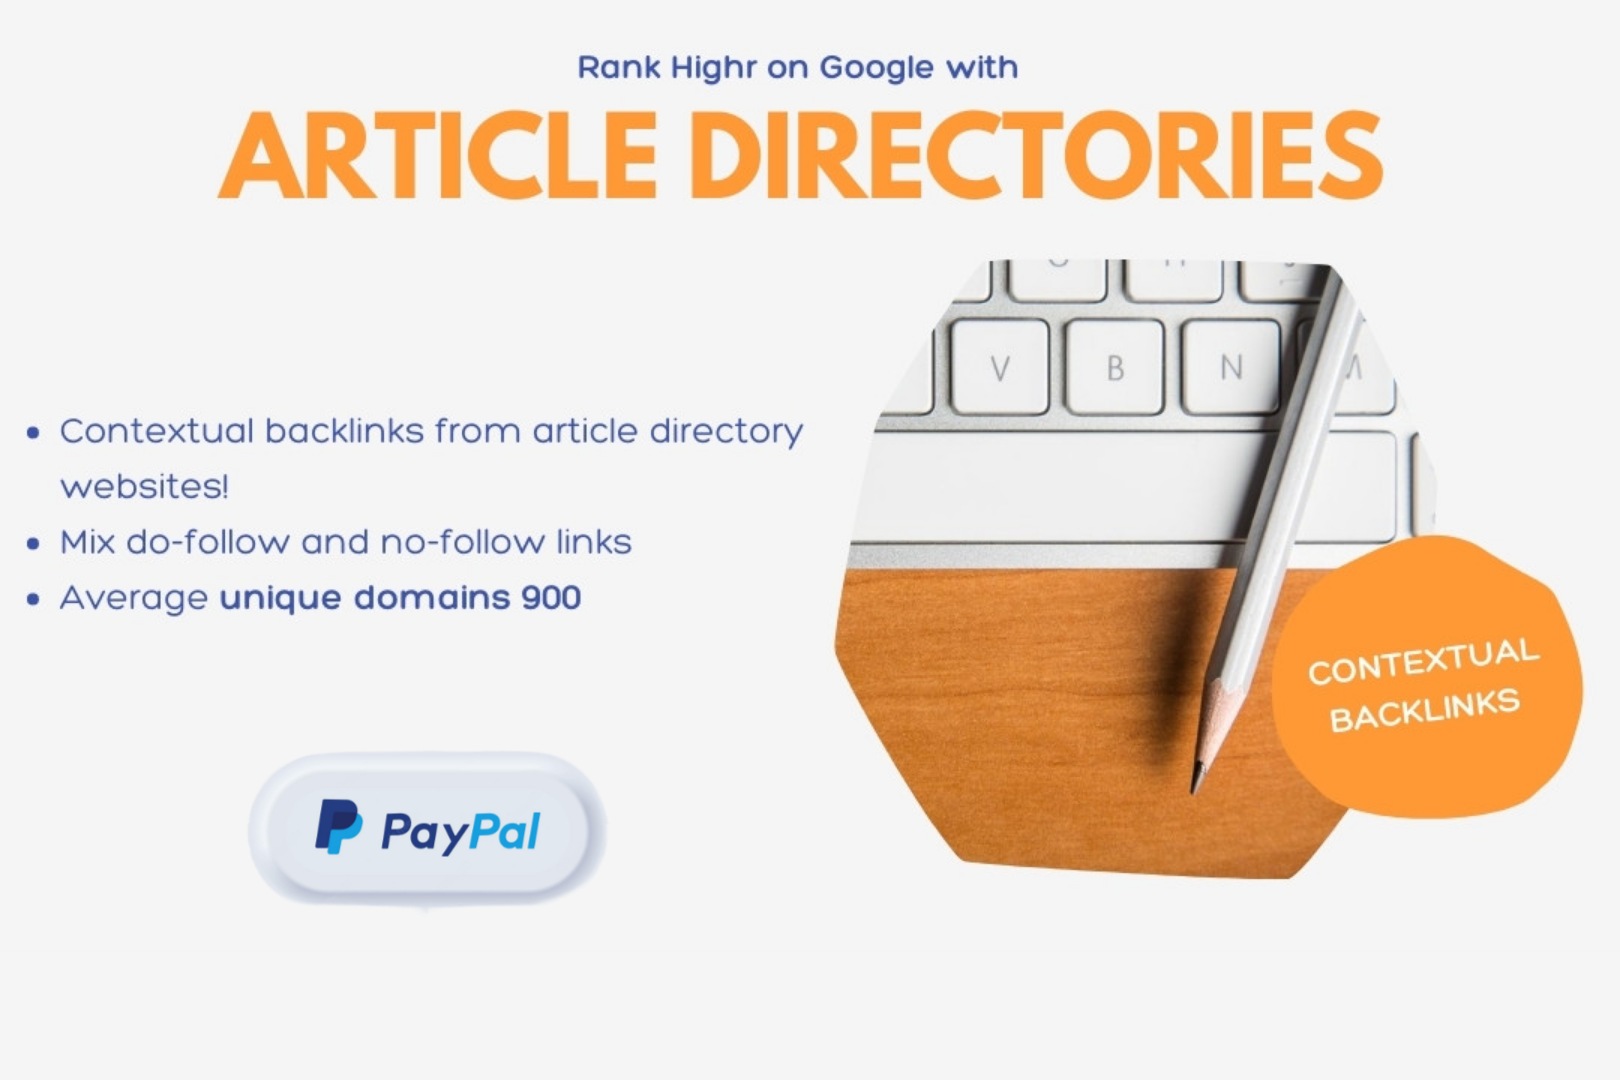 Get 1000+ High-Quality Contextual Backlinks from Top Article Directories - Boost Your SEO Today!